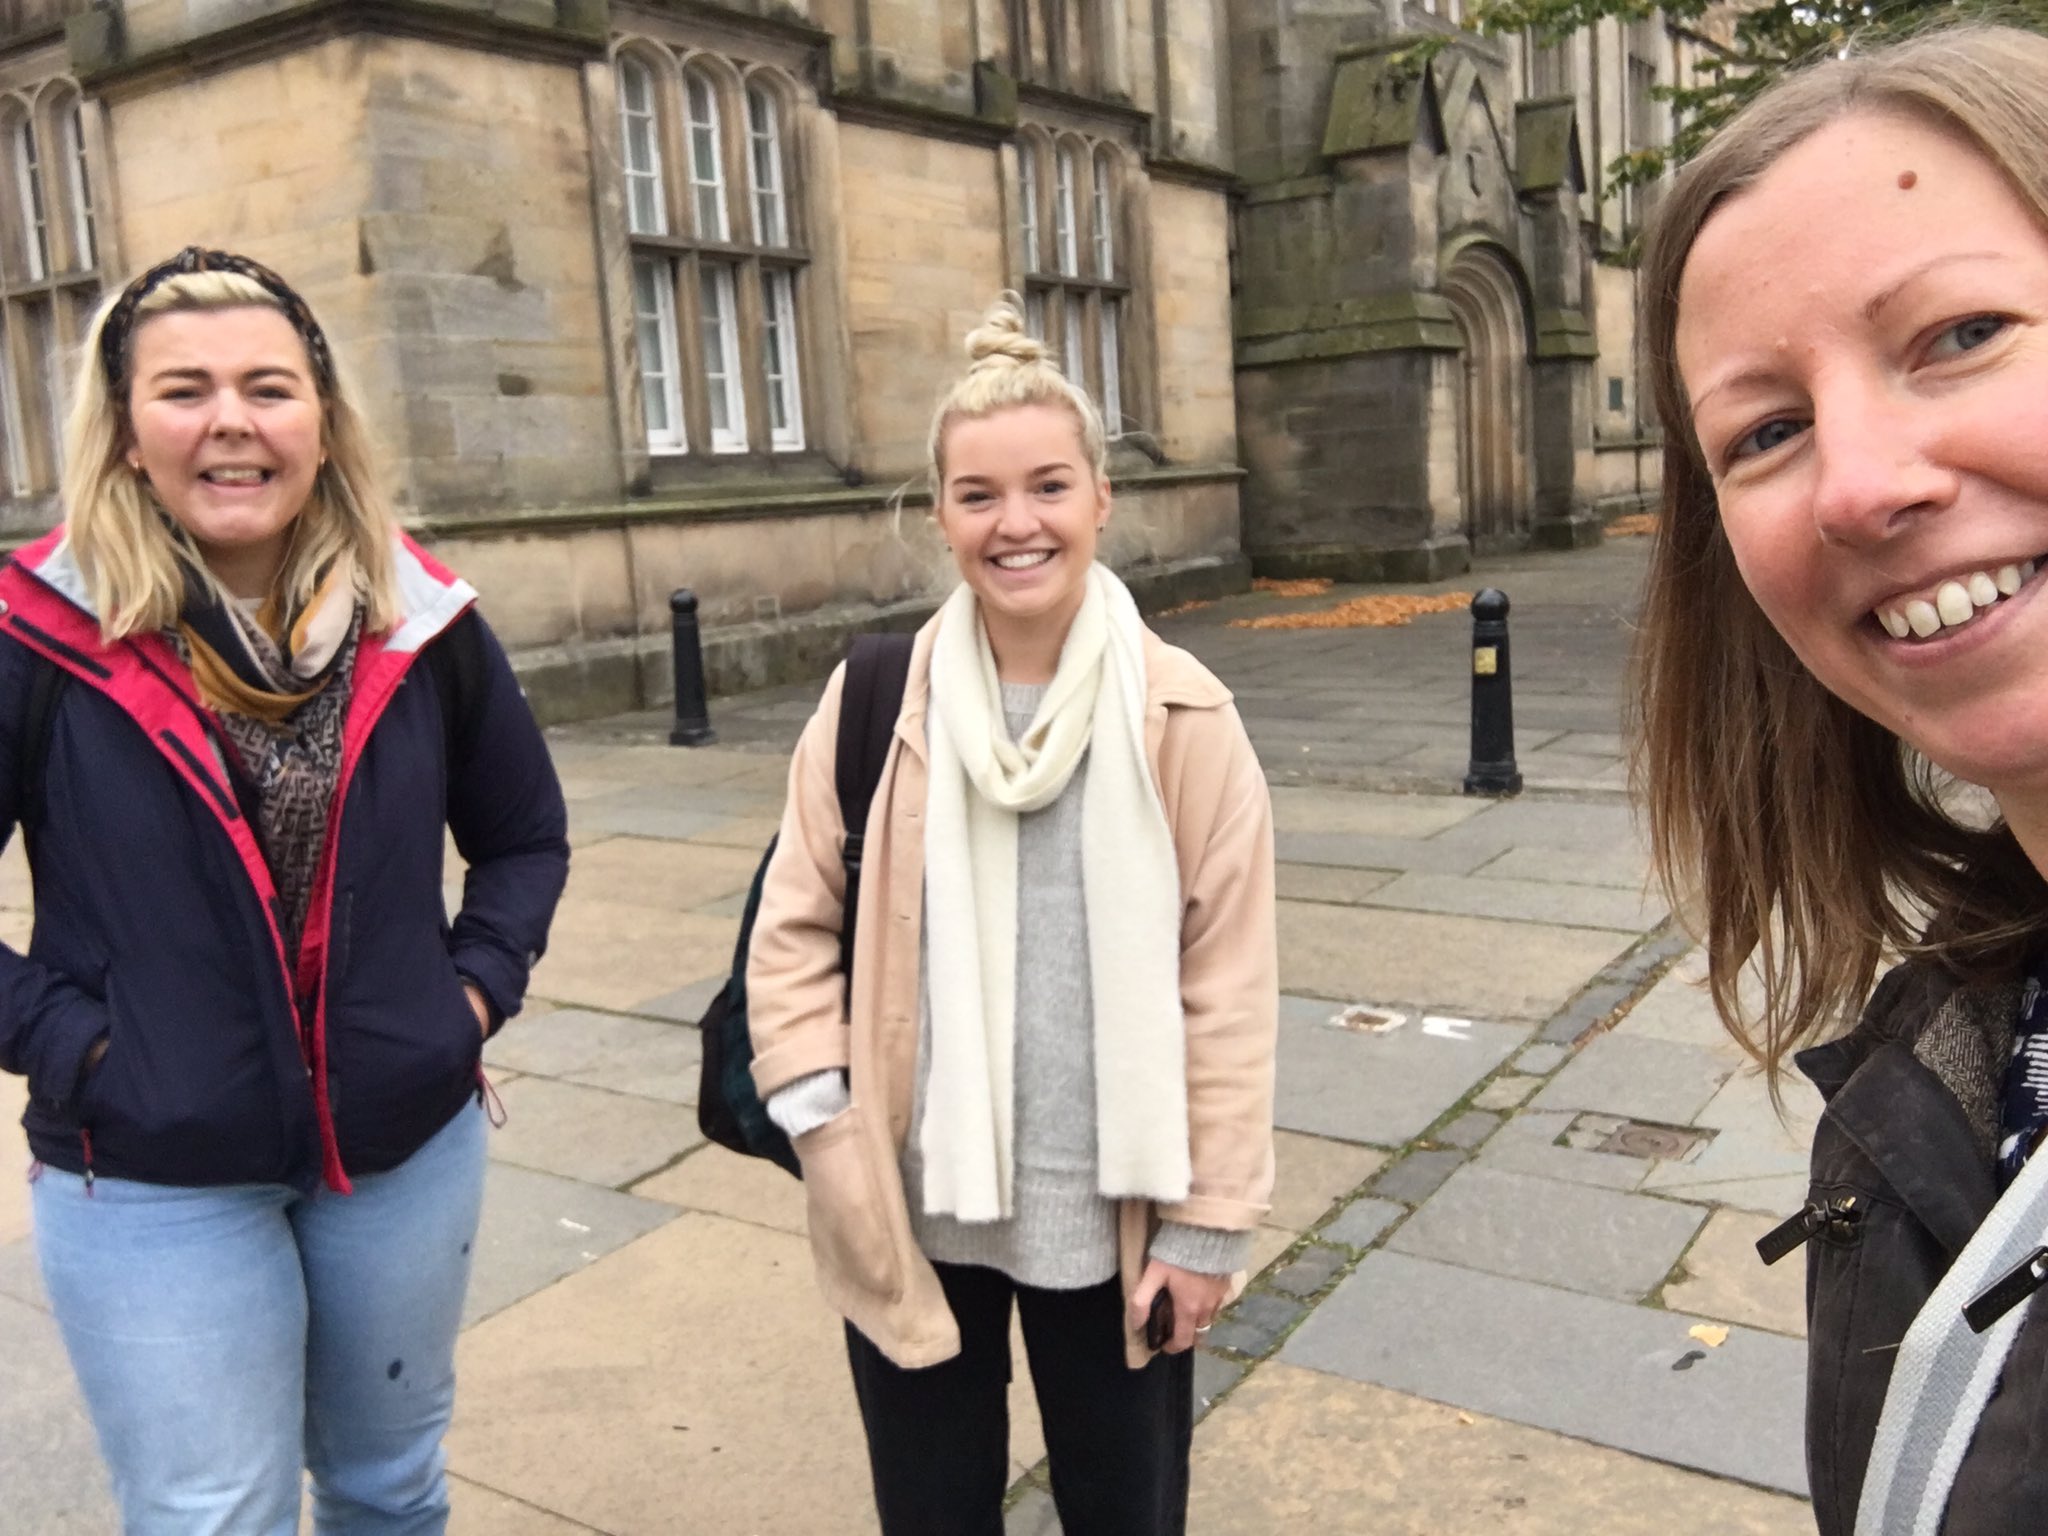 Housing Options Scotland welcomes three students from Queen Margaret University